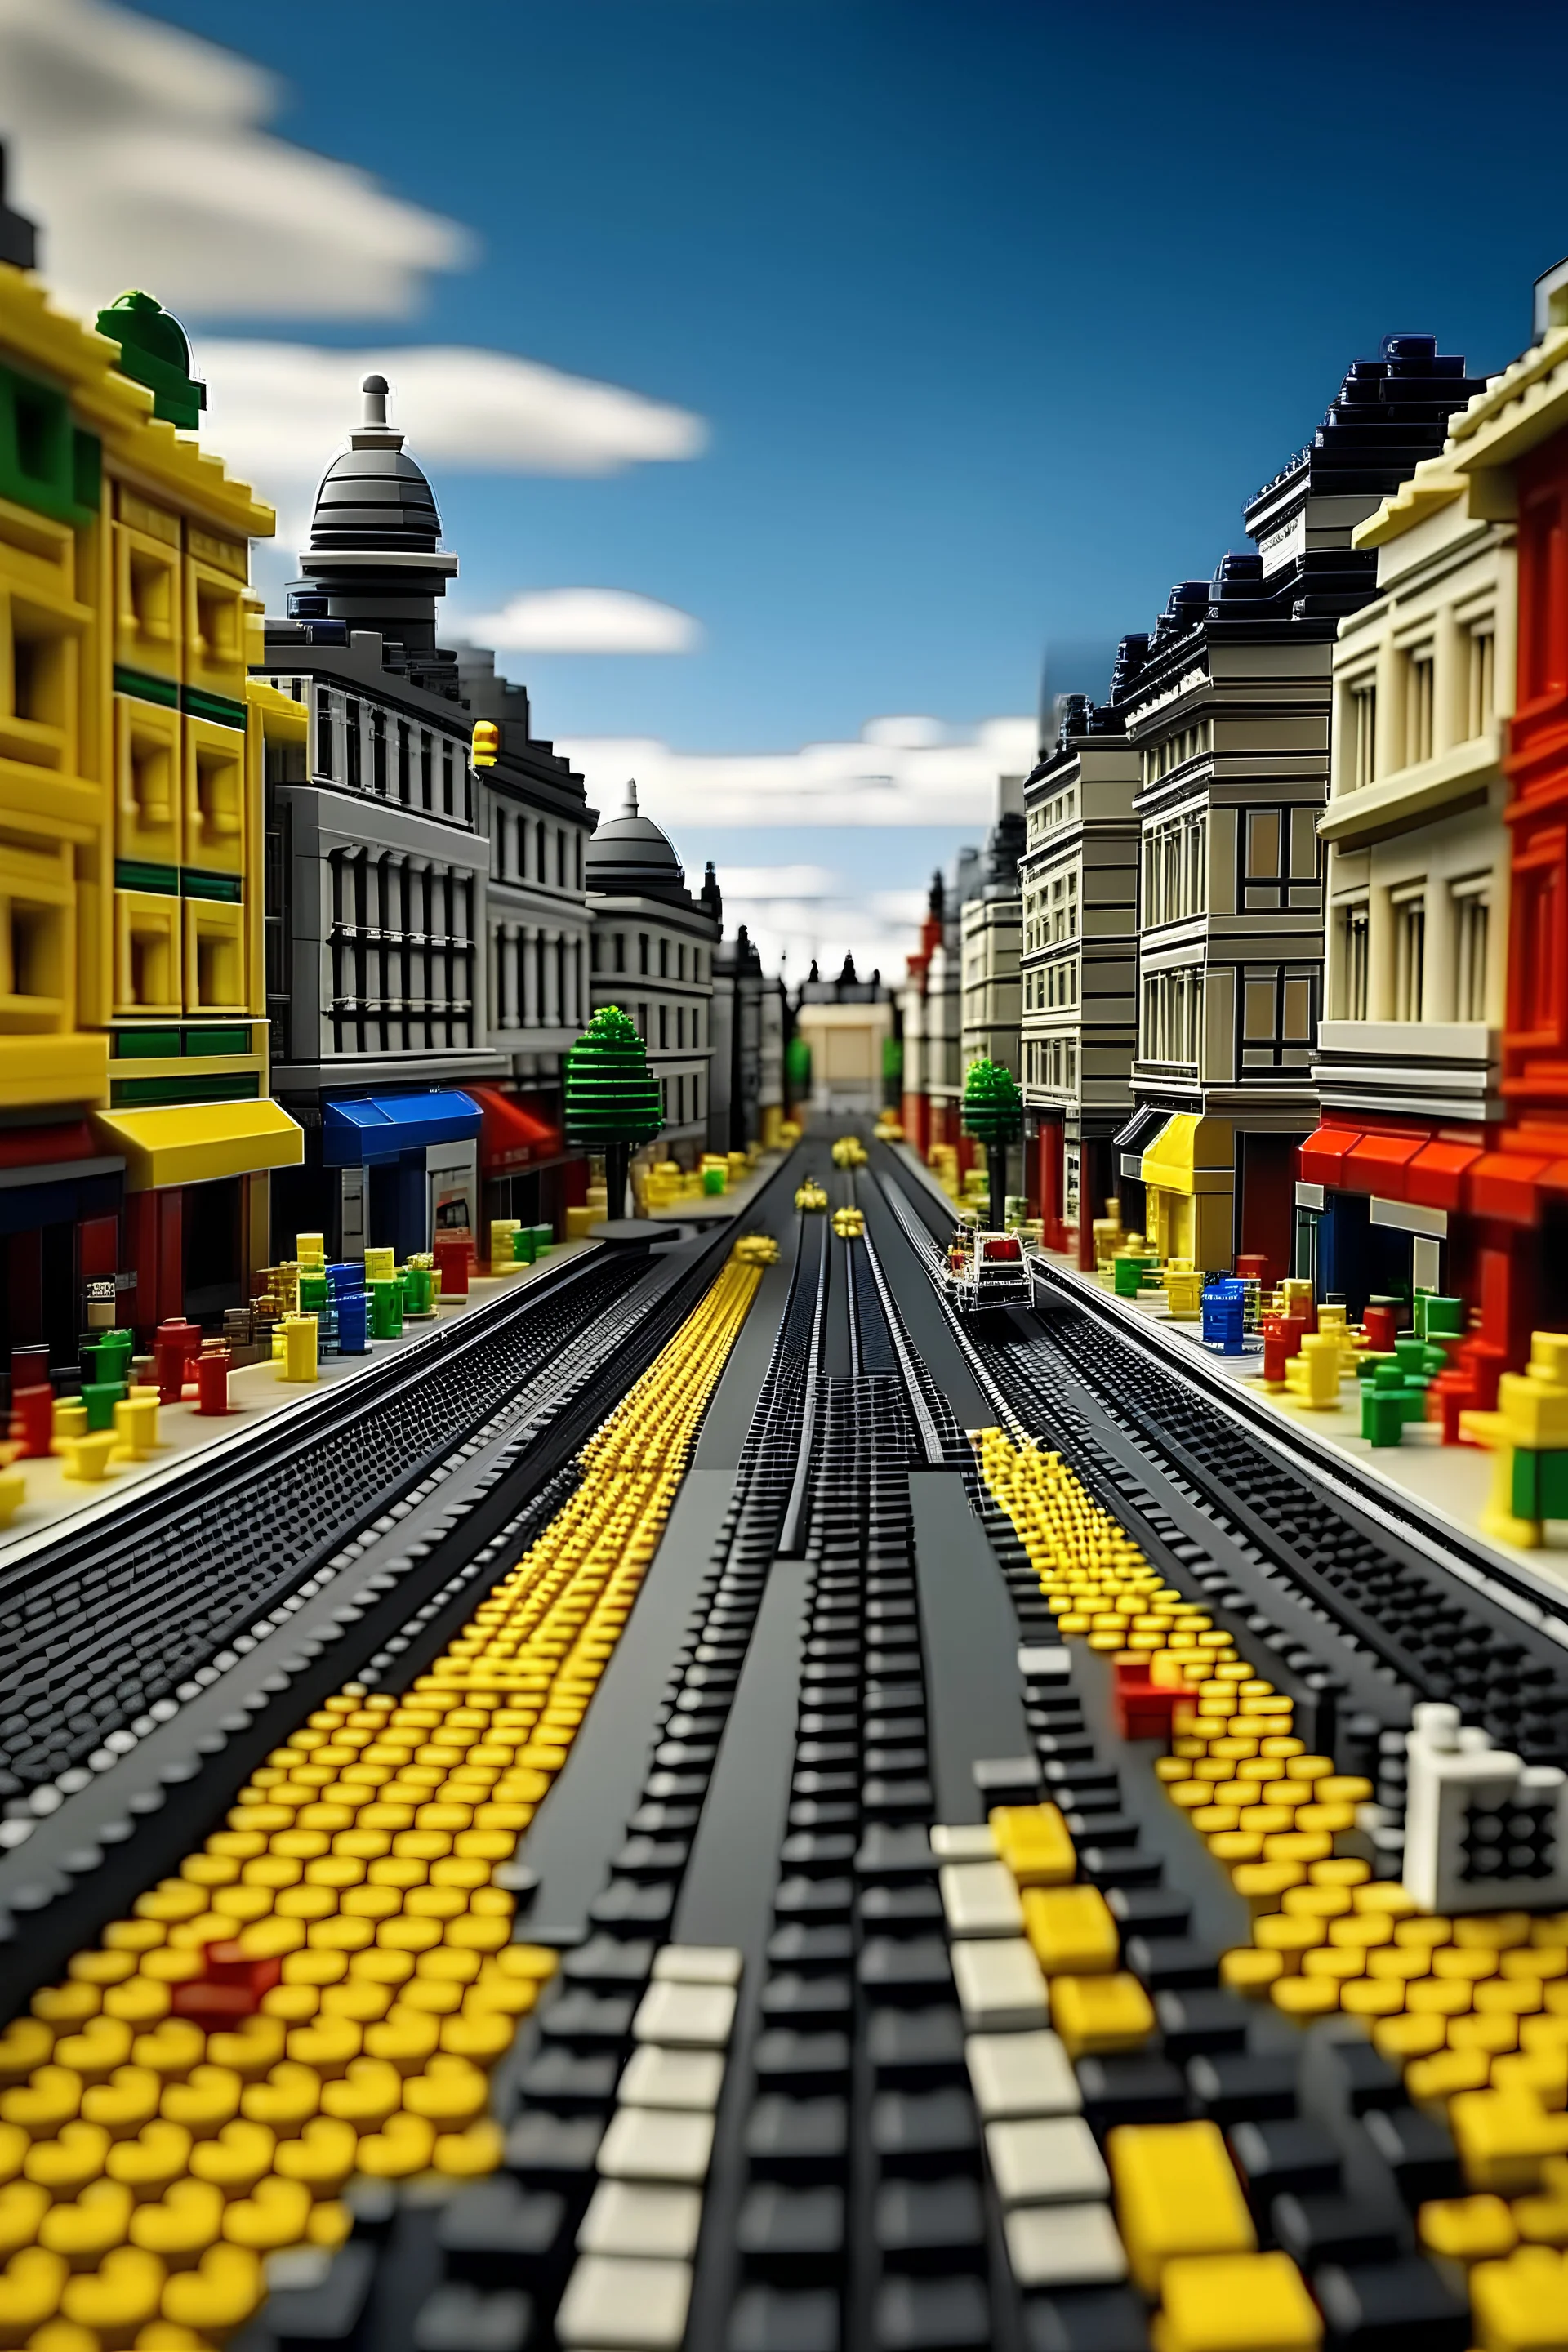 street road for a background view from someone on the road looking forward but make it look like its in lego world